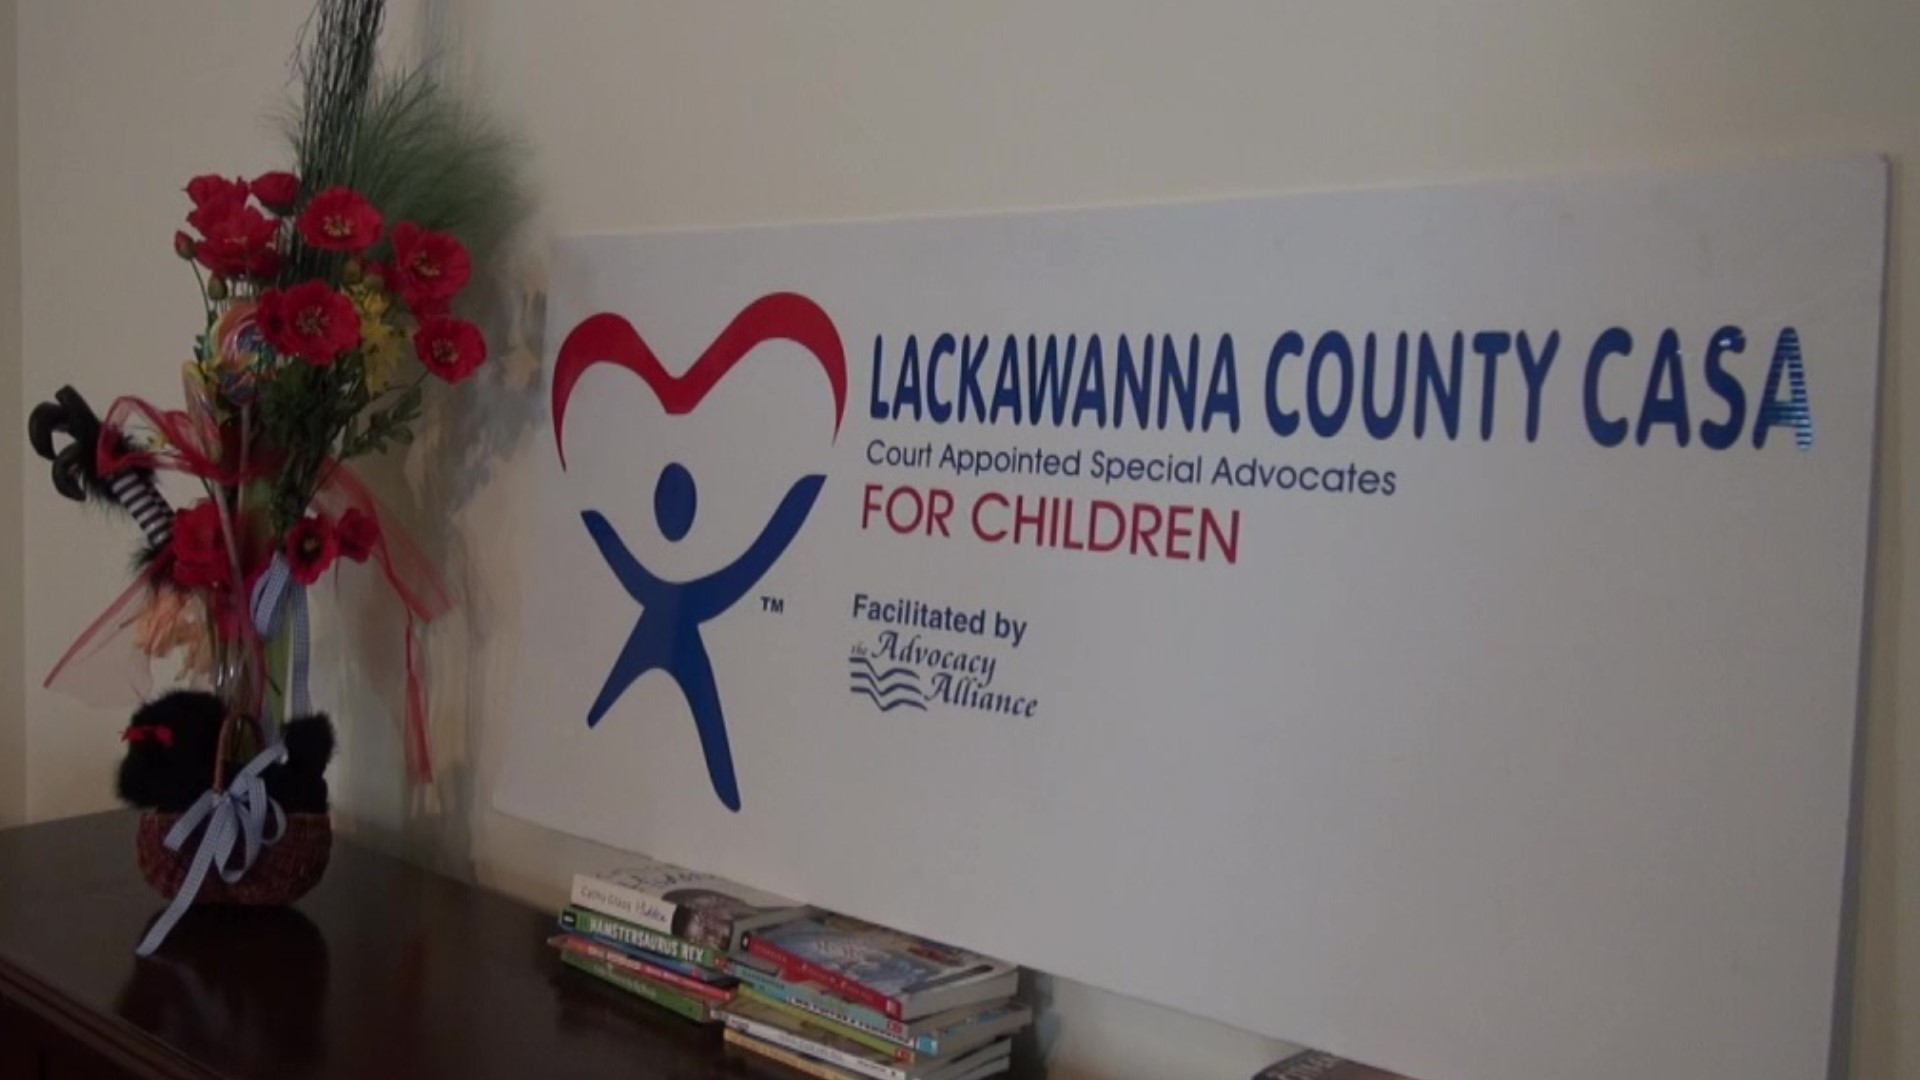 A volunteer-based advocacy group for children in foster care in Lackawanna County is planning its annual fundraising event, a Wizard of Oz-themed gala.